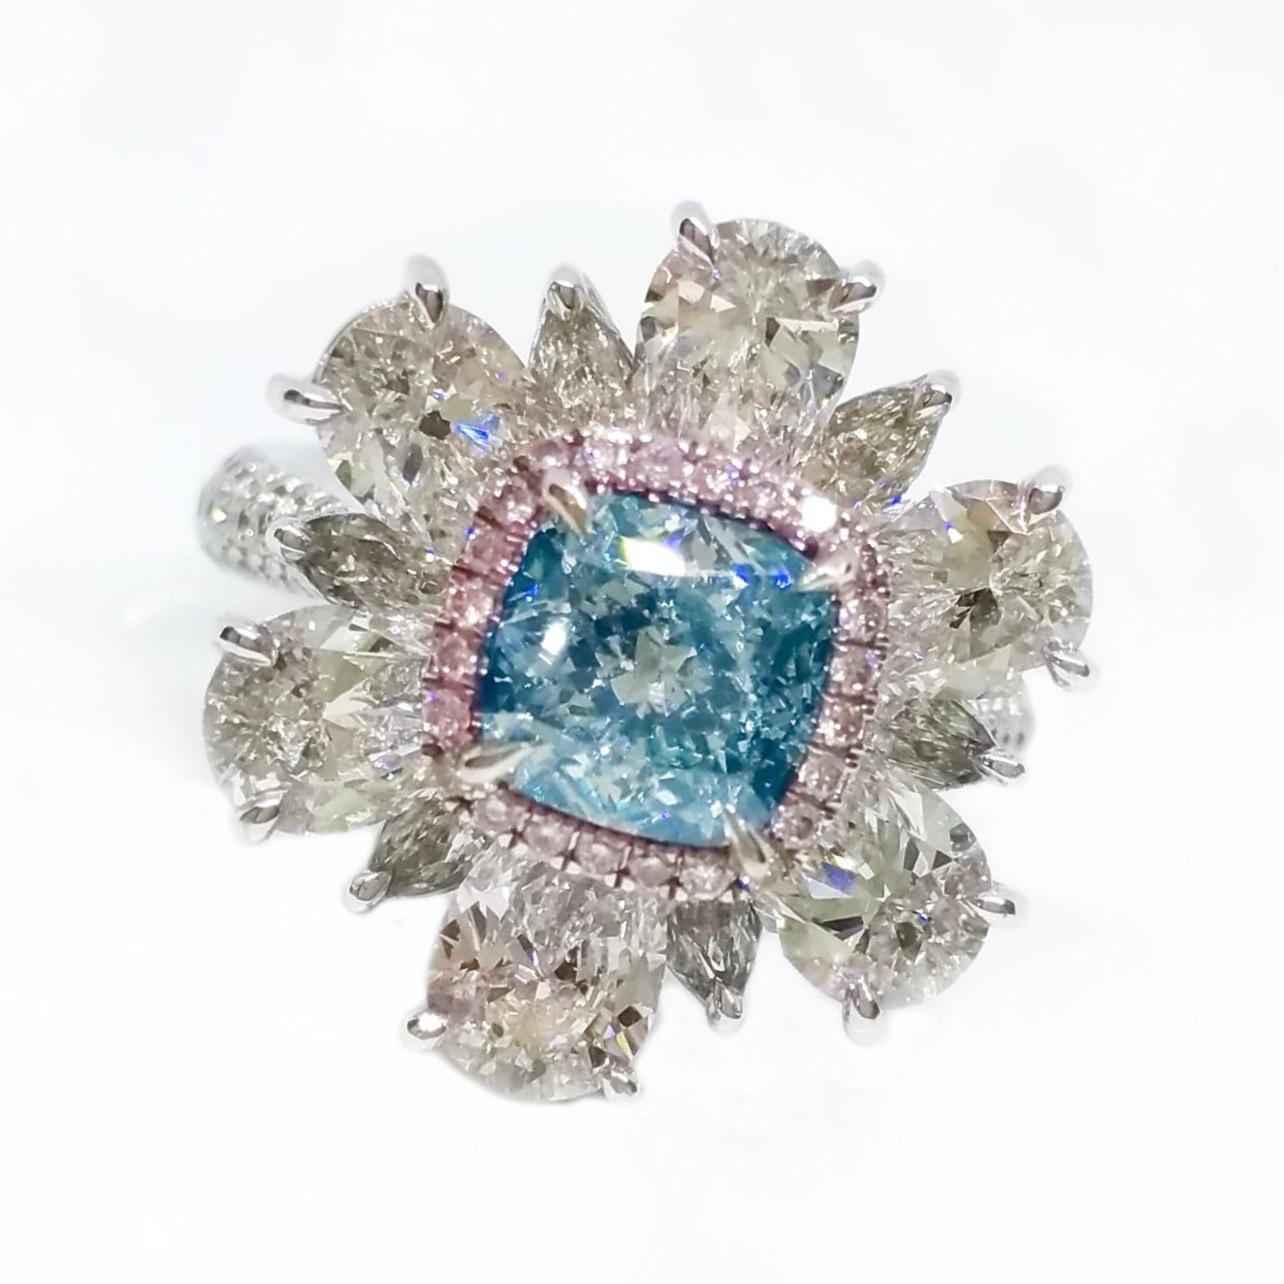 From the Emilio Jewelry Vault, We are Showcasing a stunning 2.00 carat center Gia Certified natural light blue center, with no secondary color. Emilio is an expert in natural fancy colored diamonds and specializes in only the most valuable, rare one